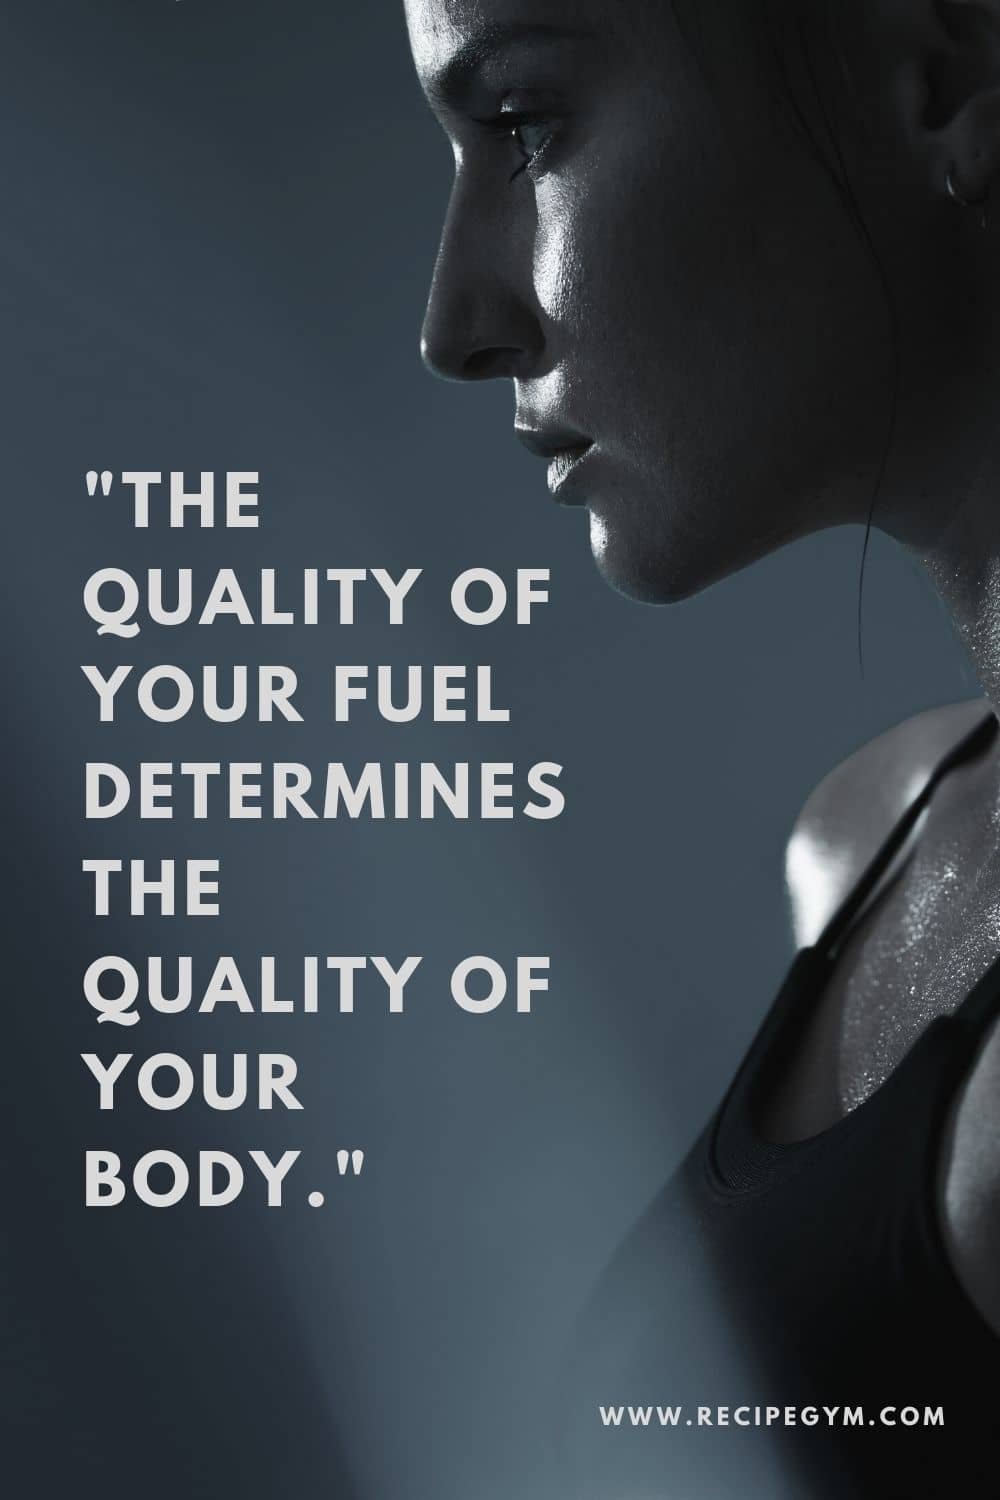 The quality of your fuel determines the quality of your body